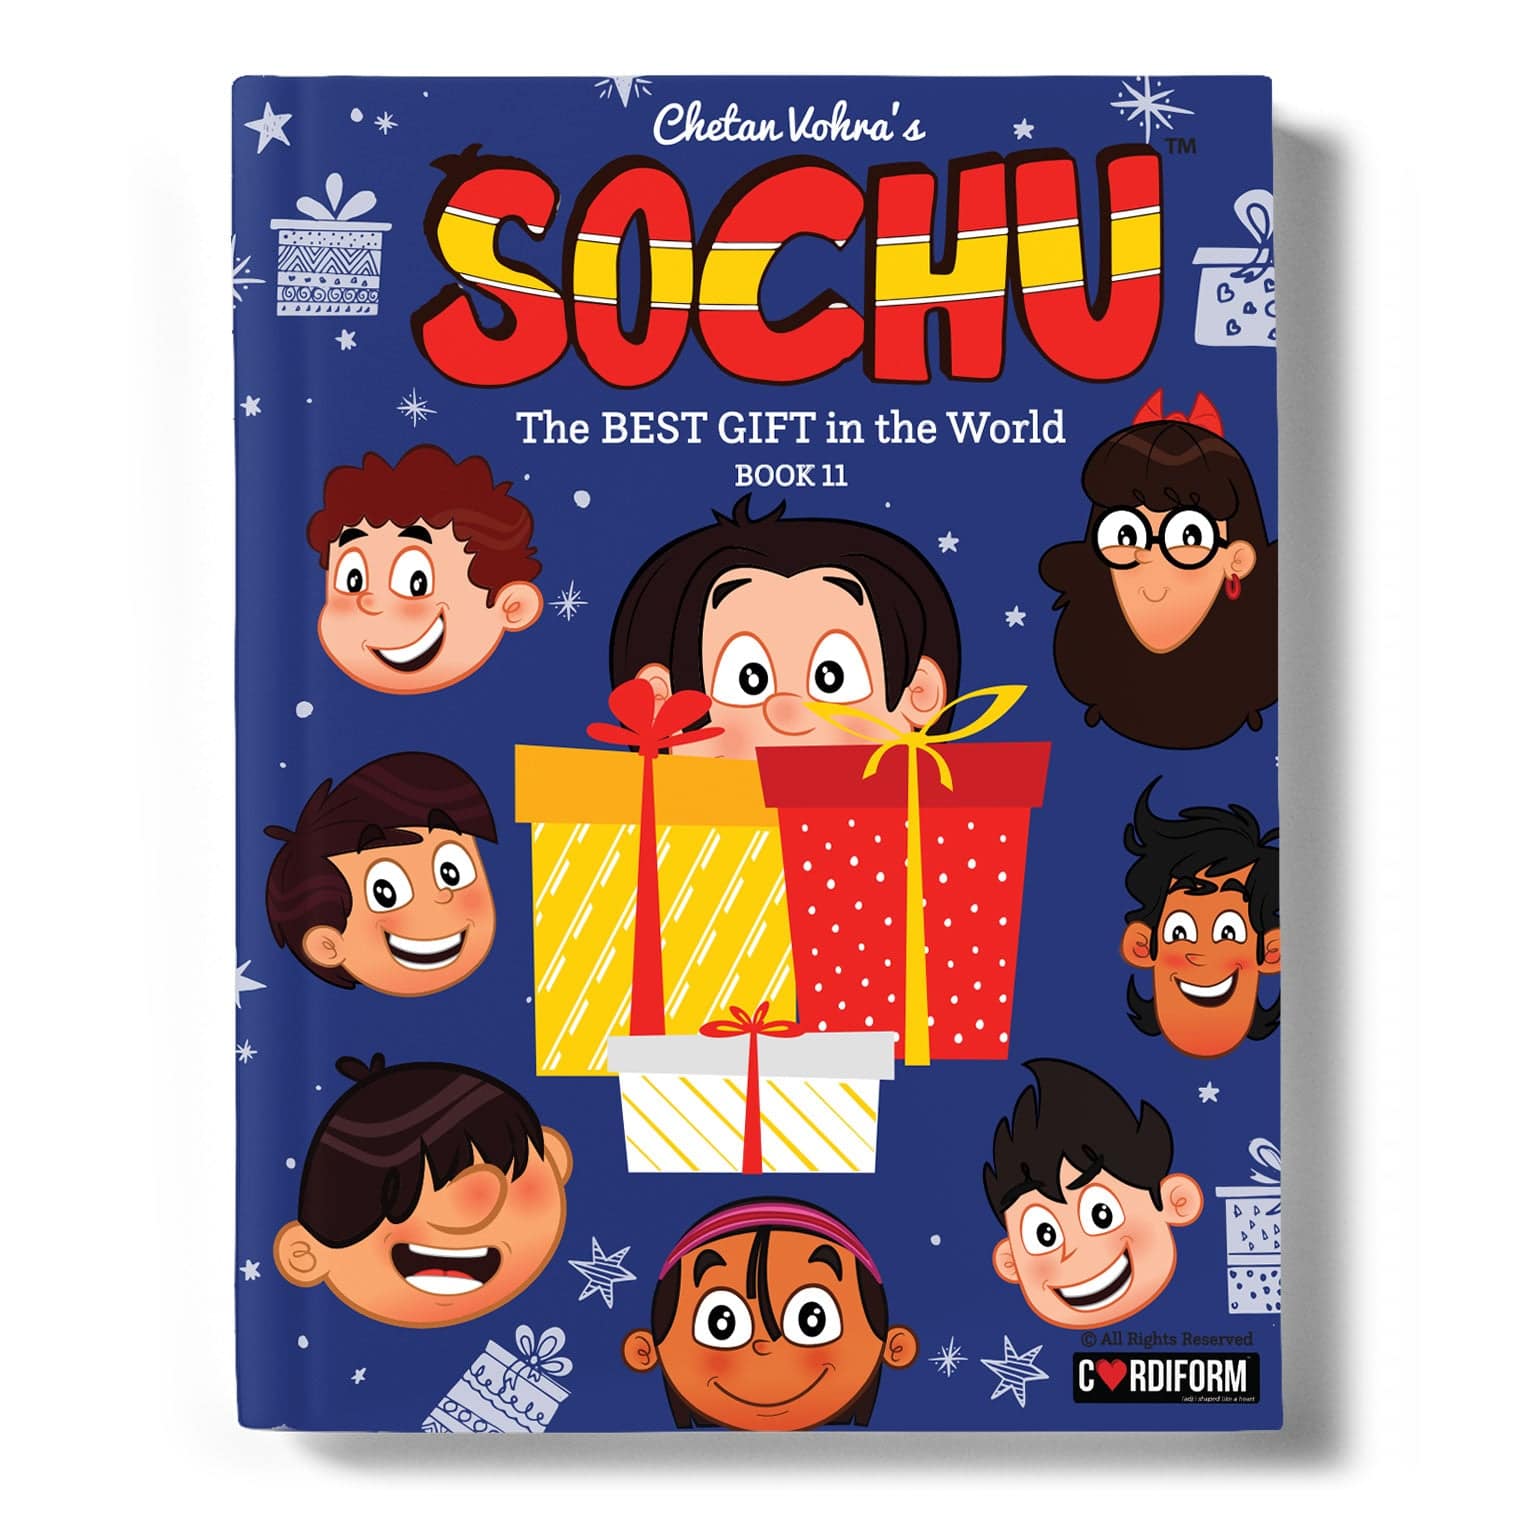 IMG : Sochu The Best Gift in the World Book#11